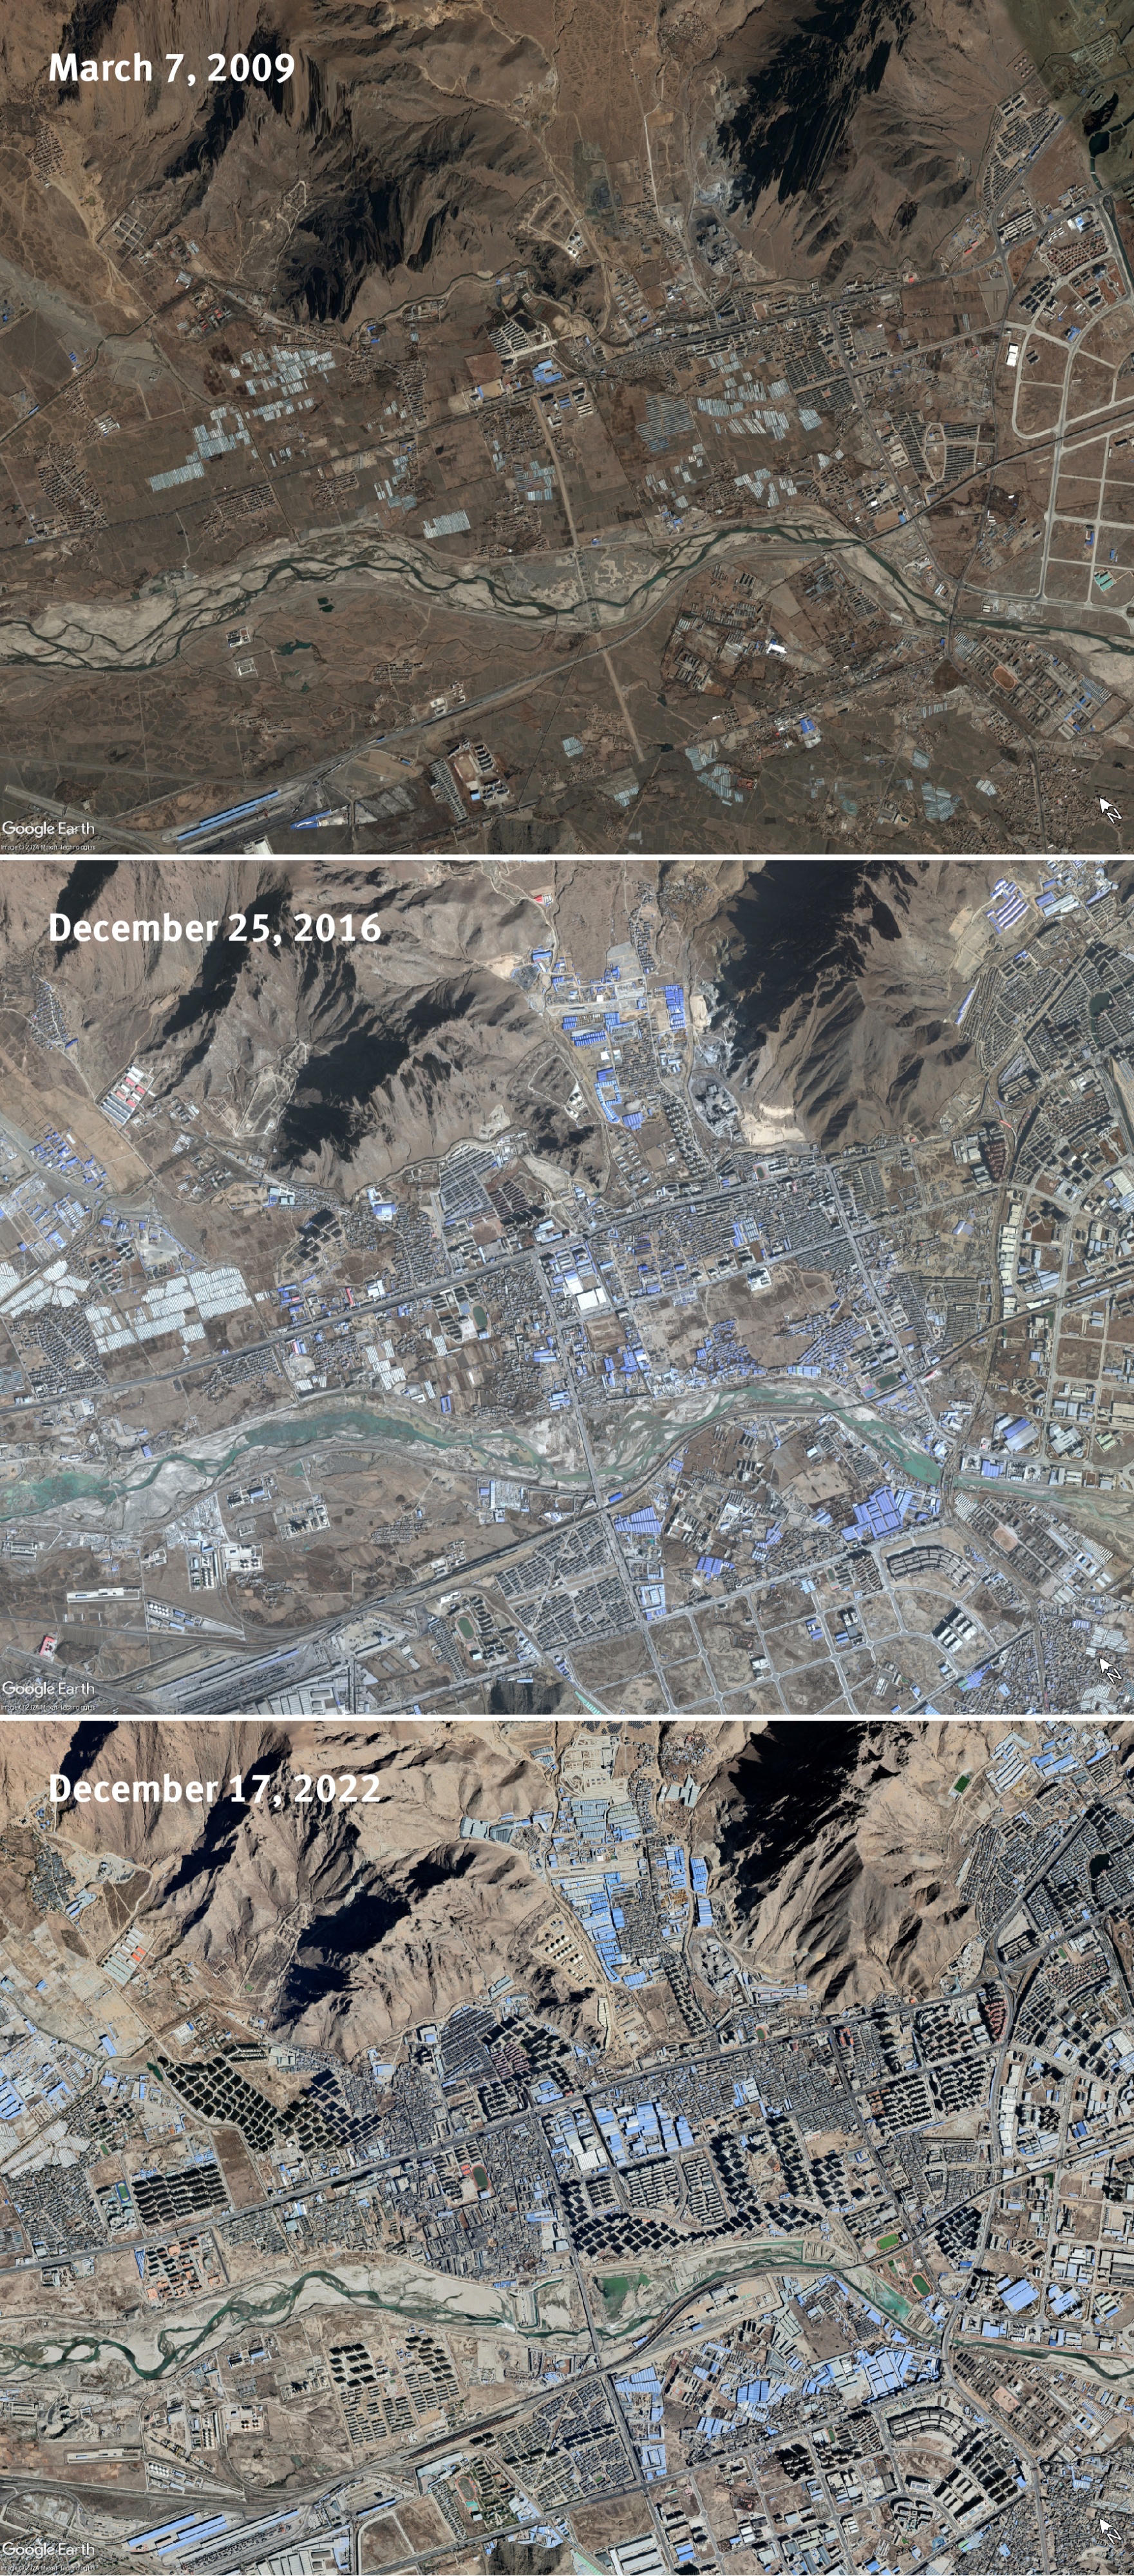 Satellite imagery showing urbanisation of the Sangmo village area at 3 different years